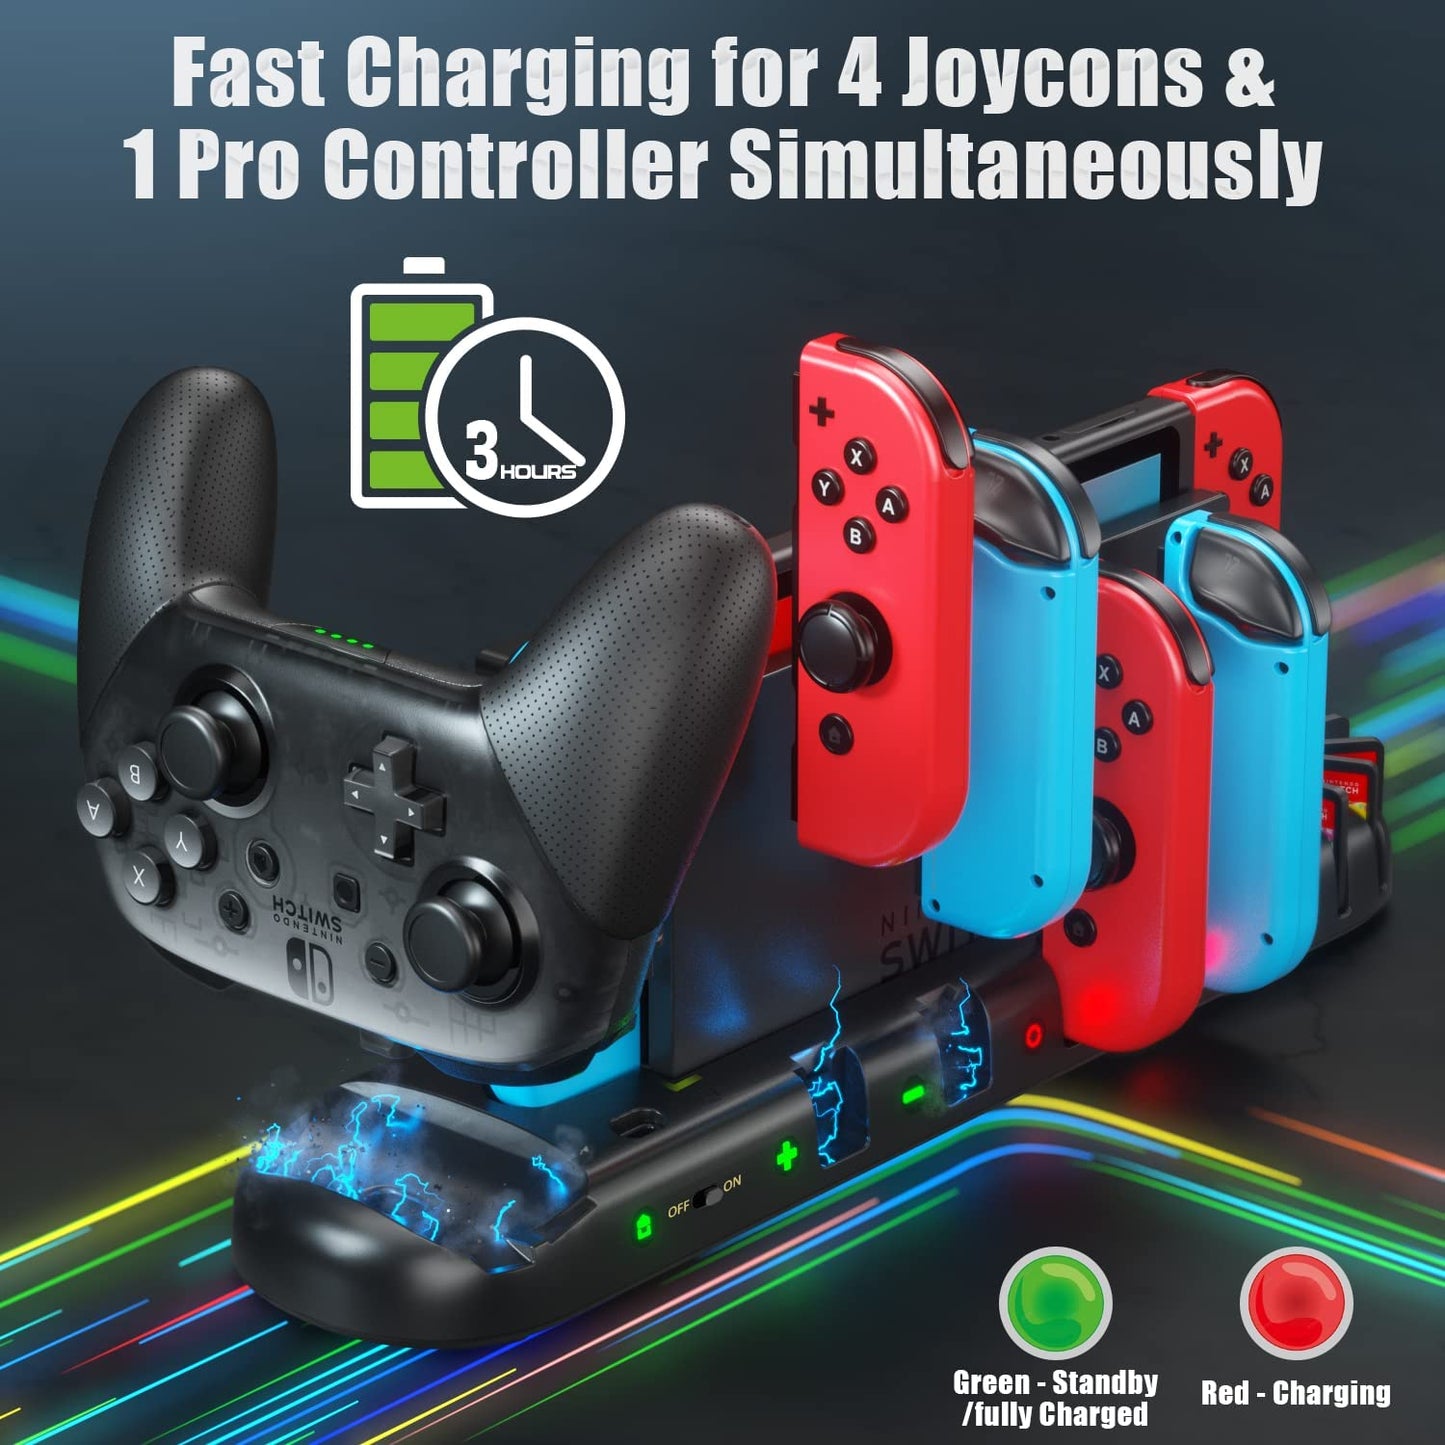 Switch Controller Charger for 6 Joy-Cons and Pro Controller